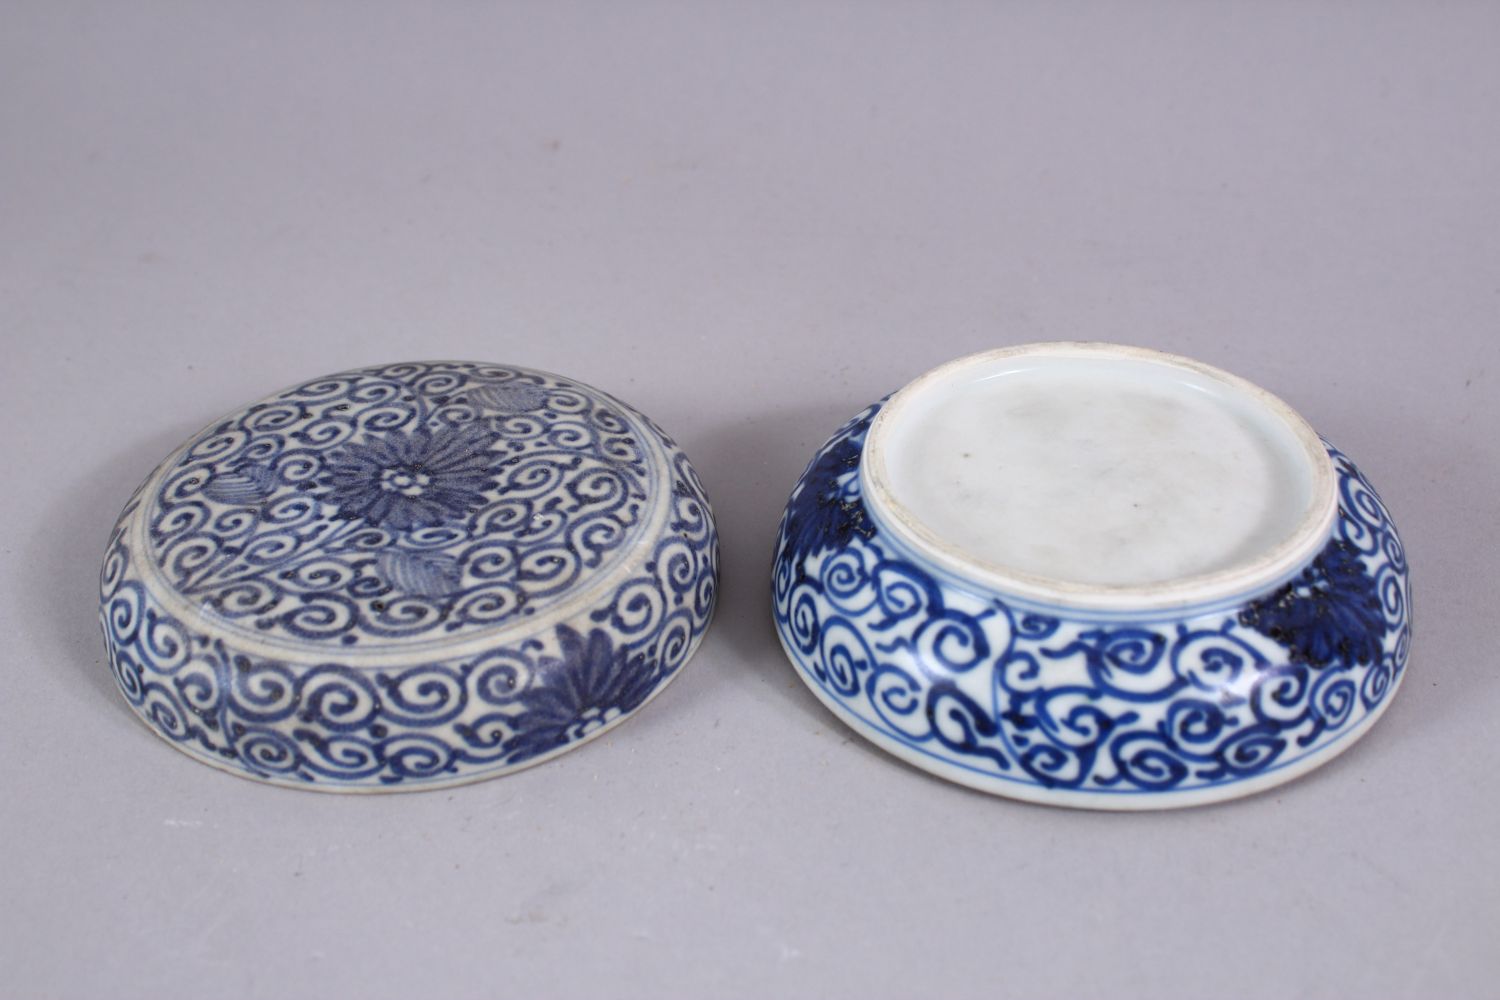 A CHINESE KANGXI PERIOD BLUE & WHITE PORCELAIN BOX & COVER - 10CM - Image 3 of 3